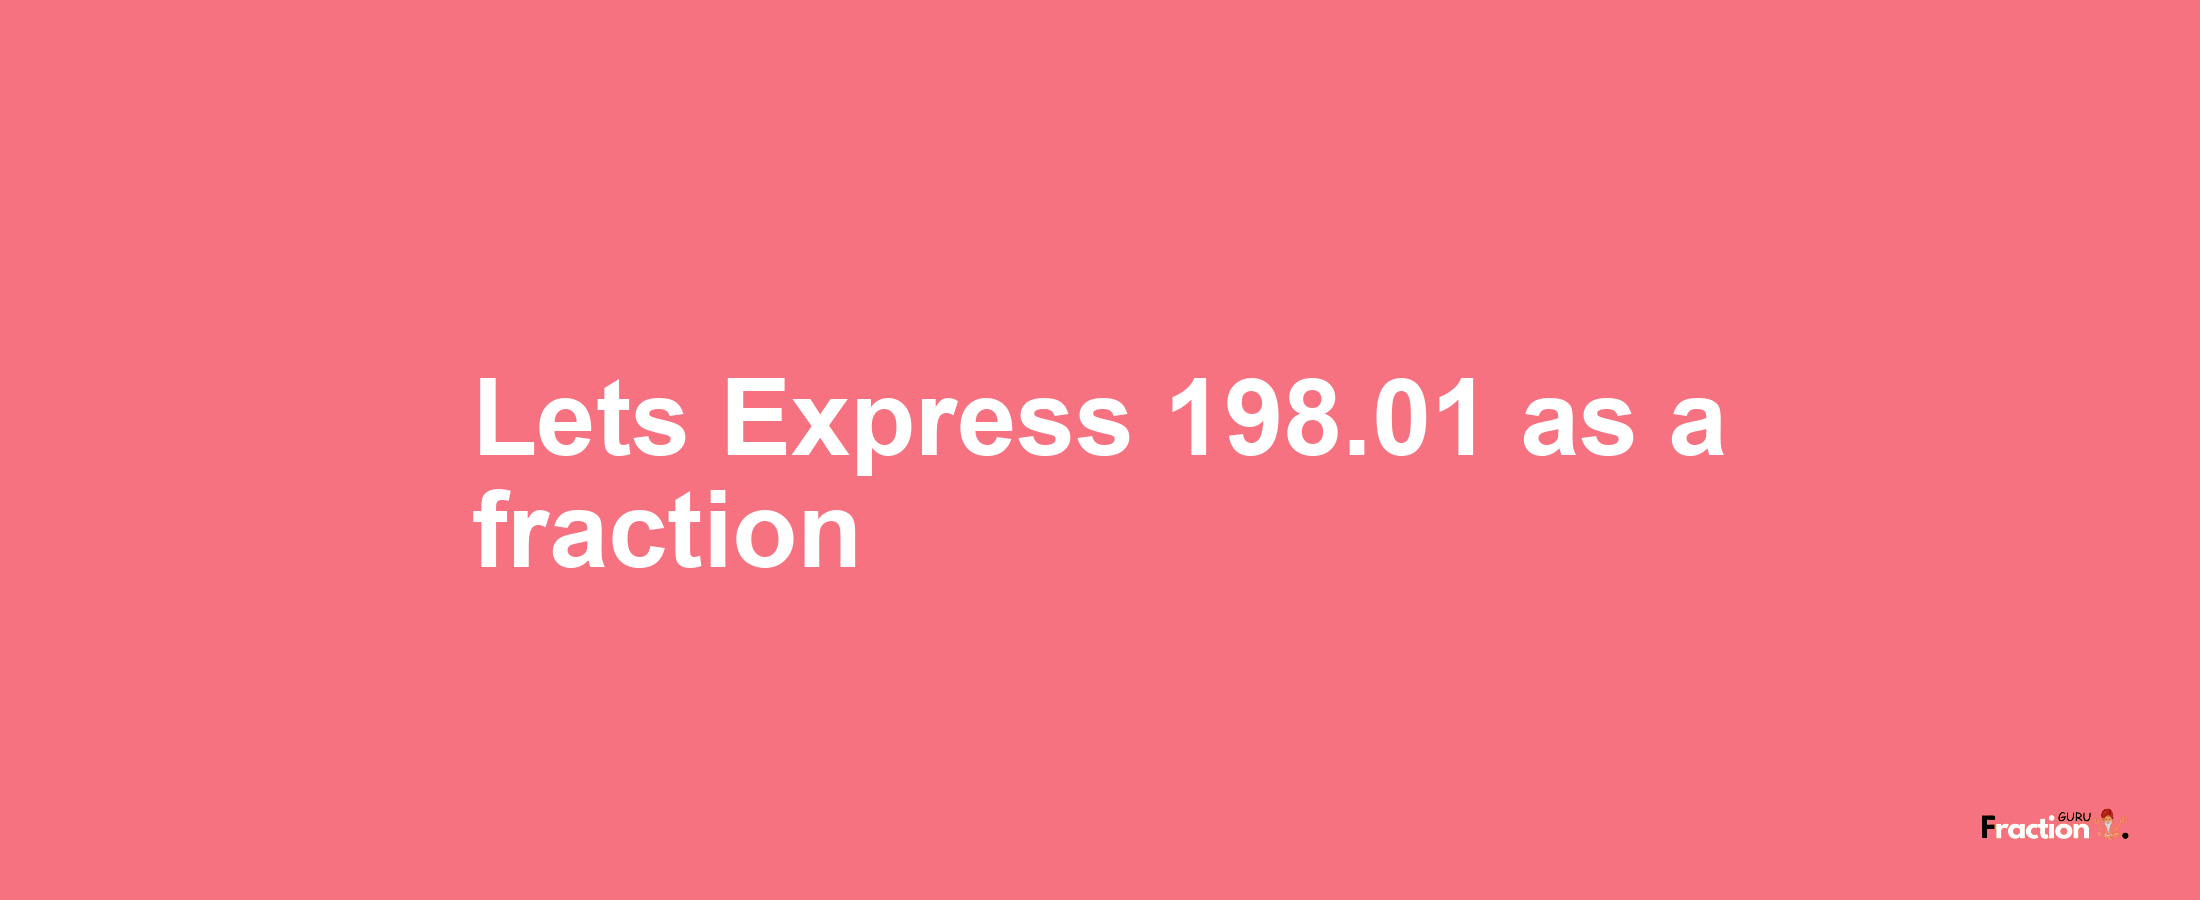 Lets Express 198.01 as afraction